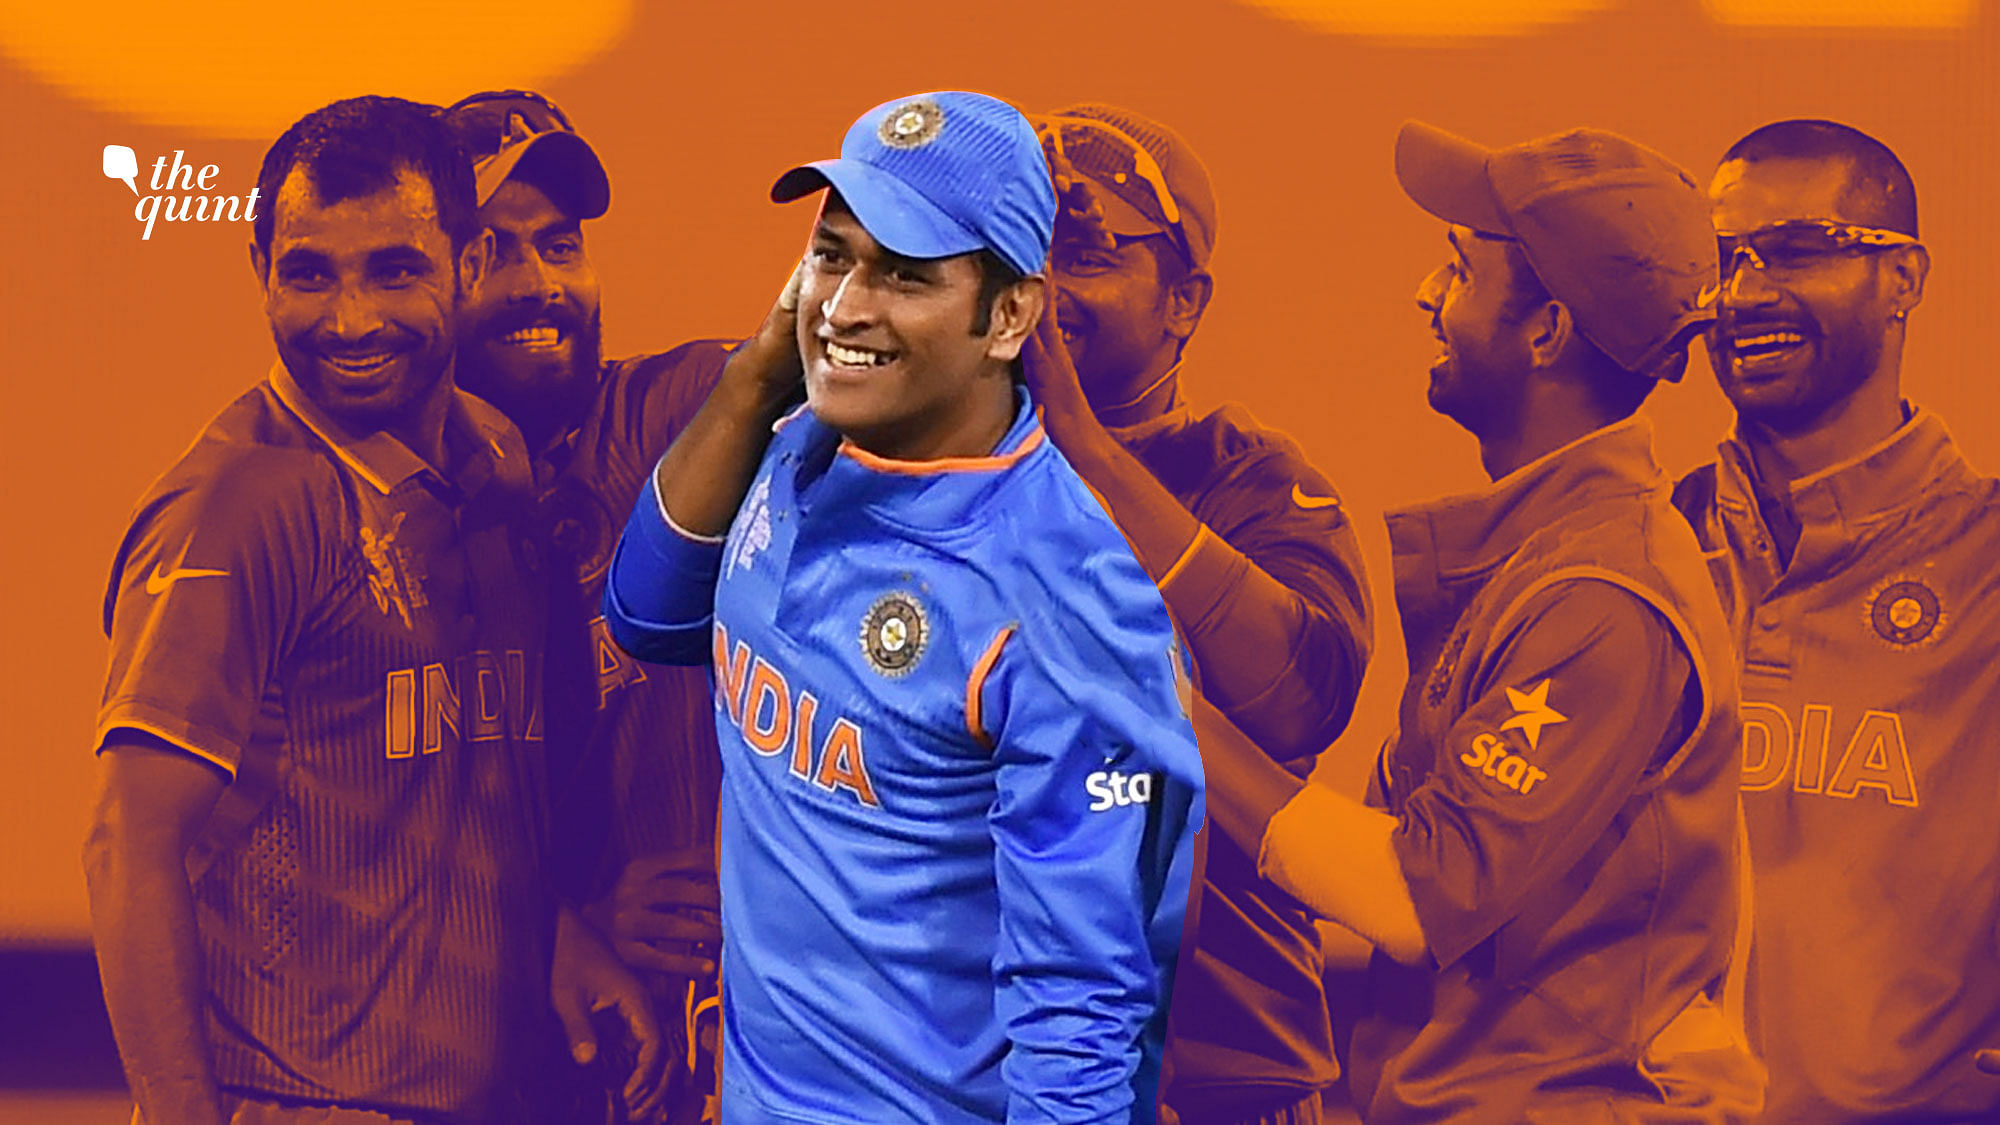 Cricketers across the world shared memories, calling Dhoni India’s most illustrious captain.